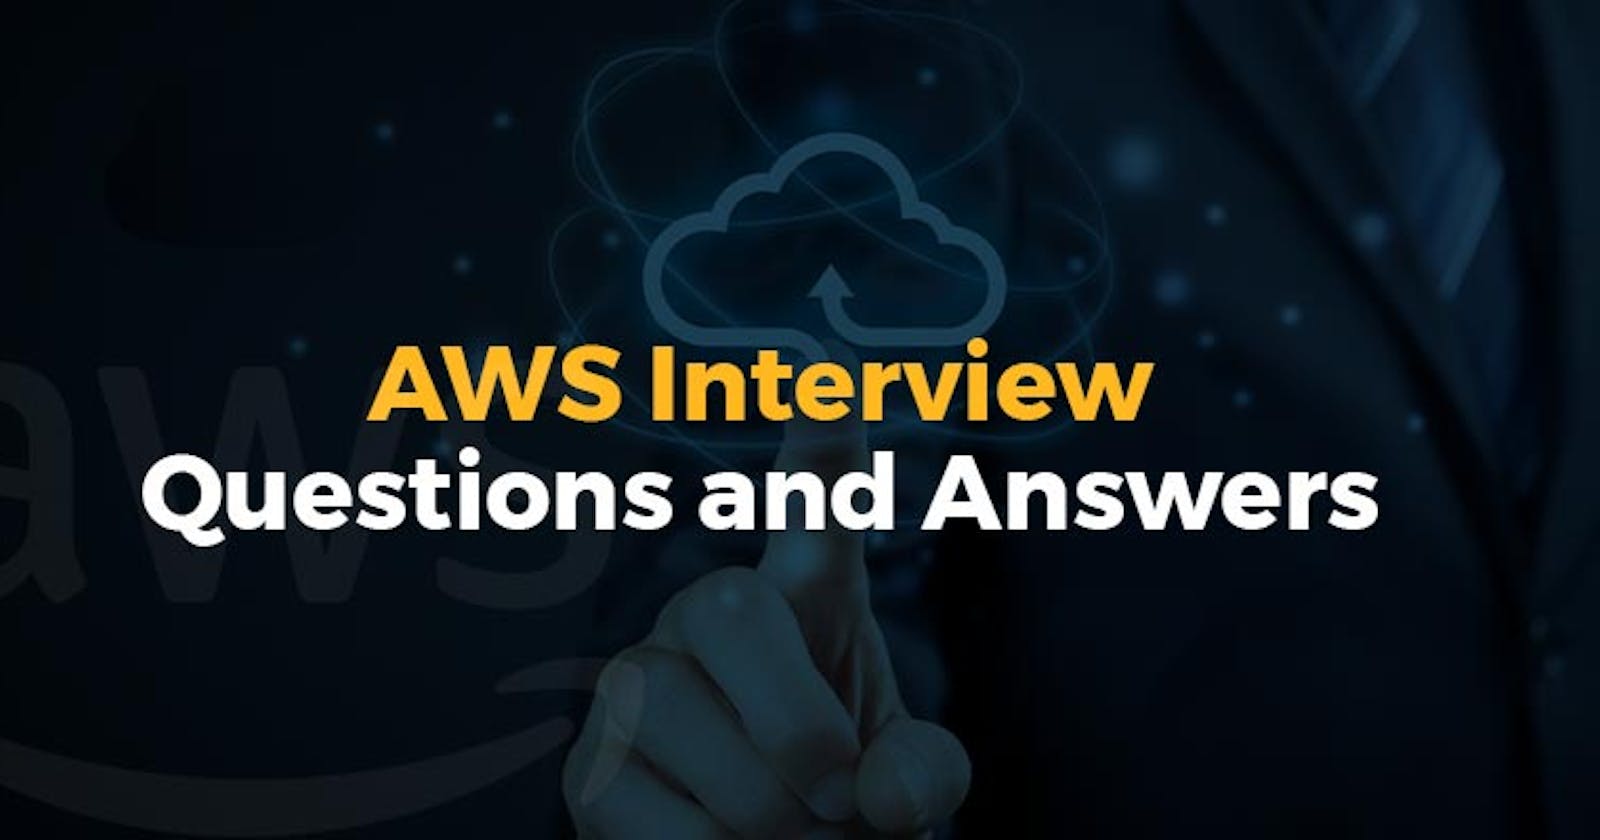 Day 49 - INTERVIEW QUESTIONS ON AWS